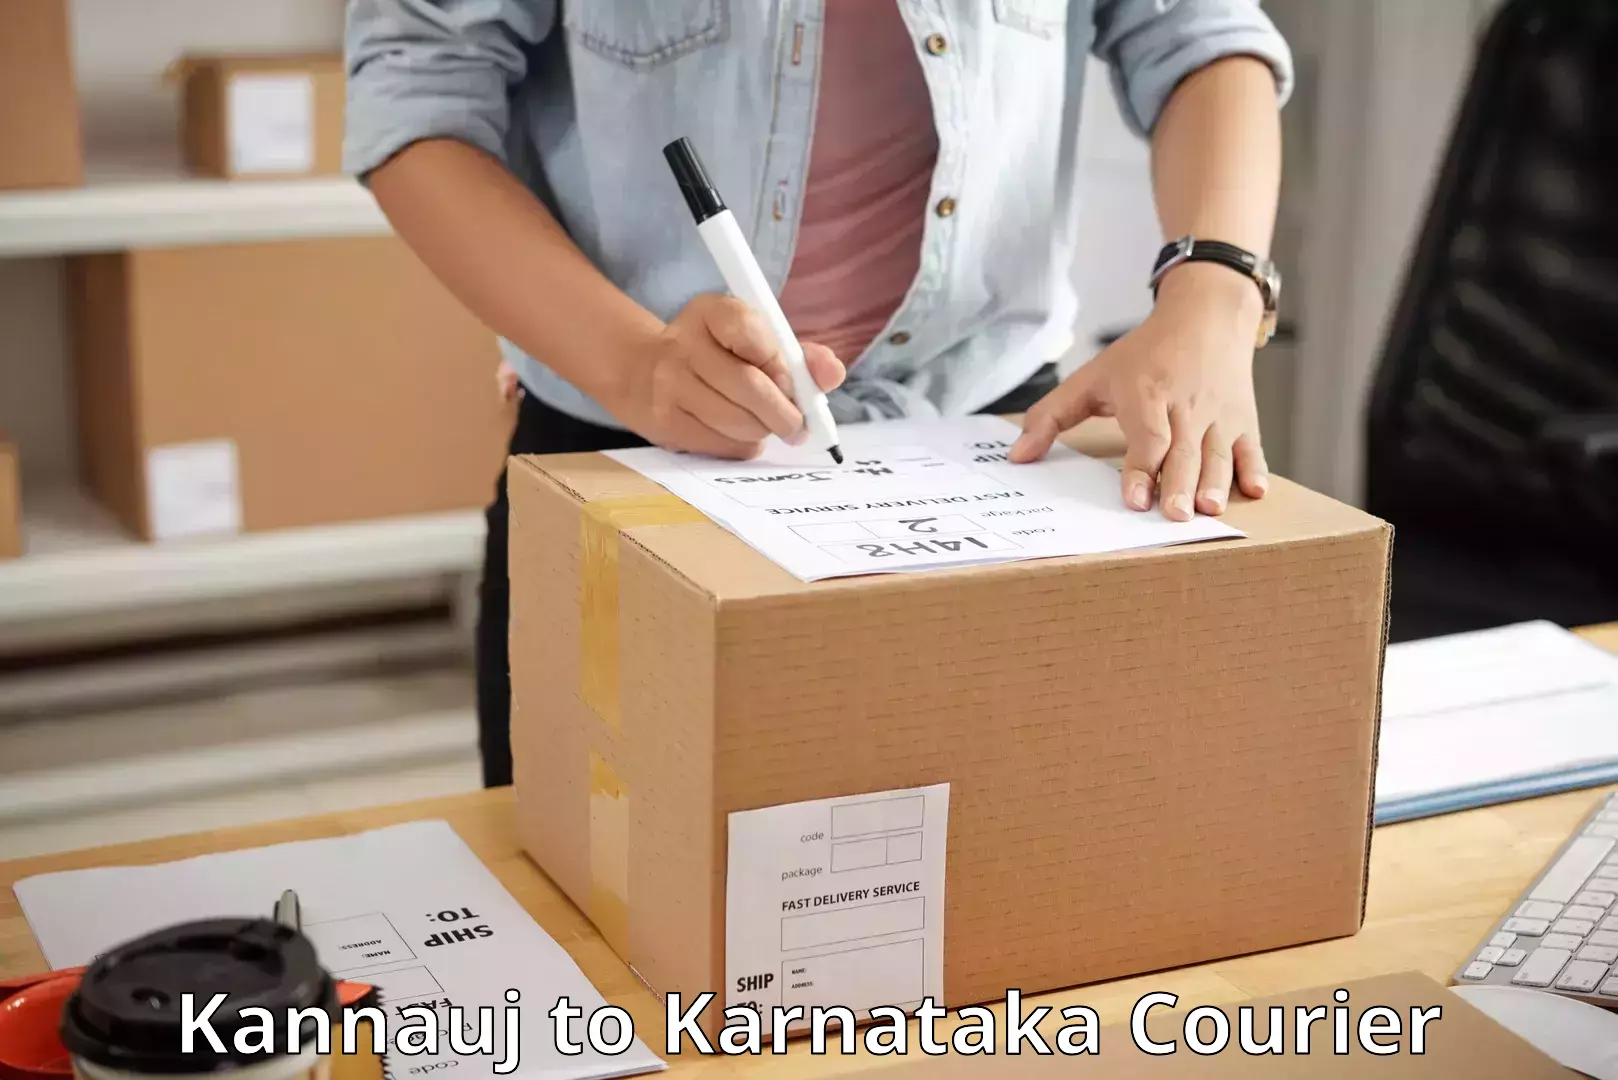 Reliable courier service Kannauj to Dharwad